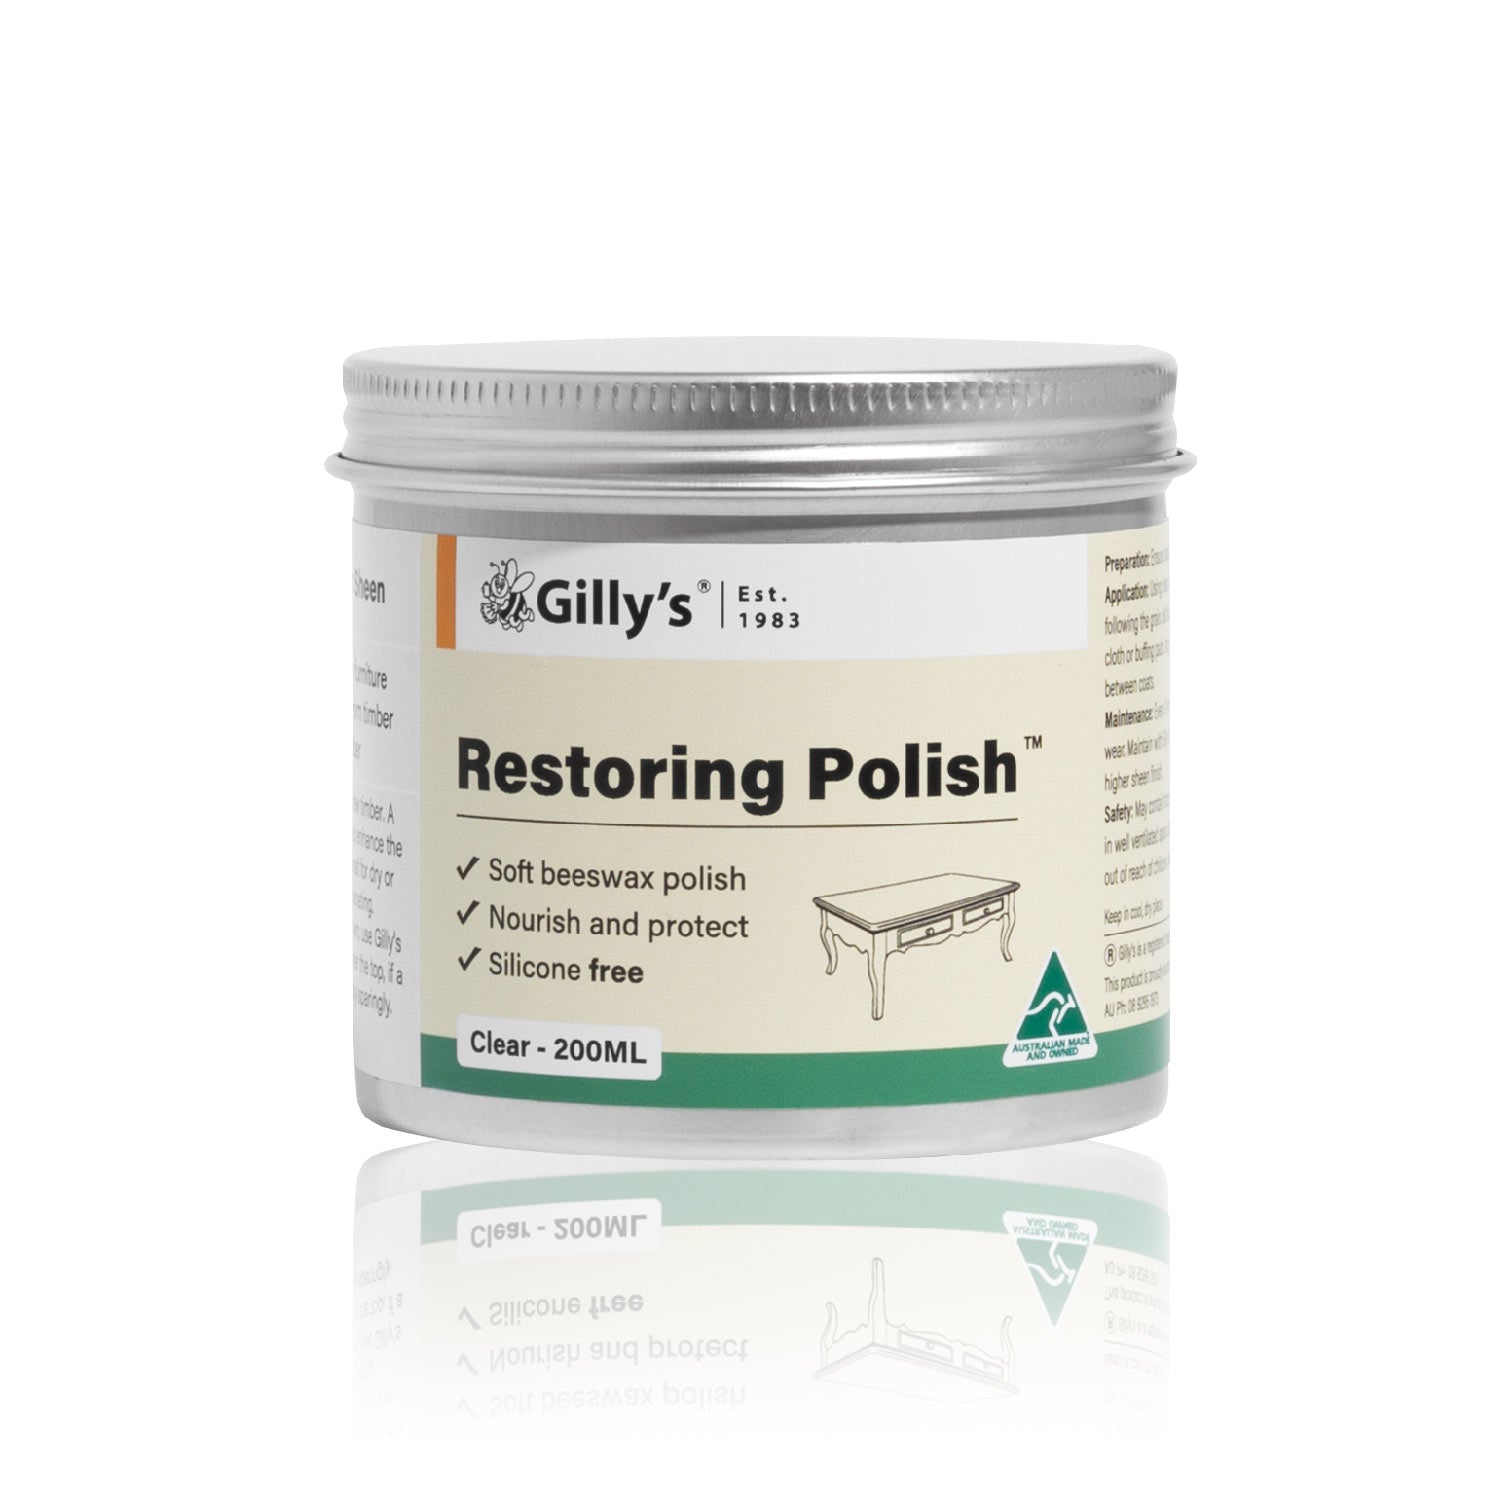 Restoring Polish by Gilly's